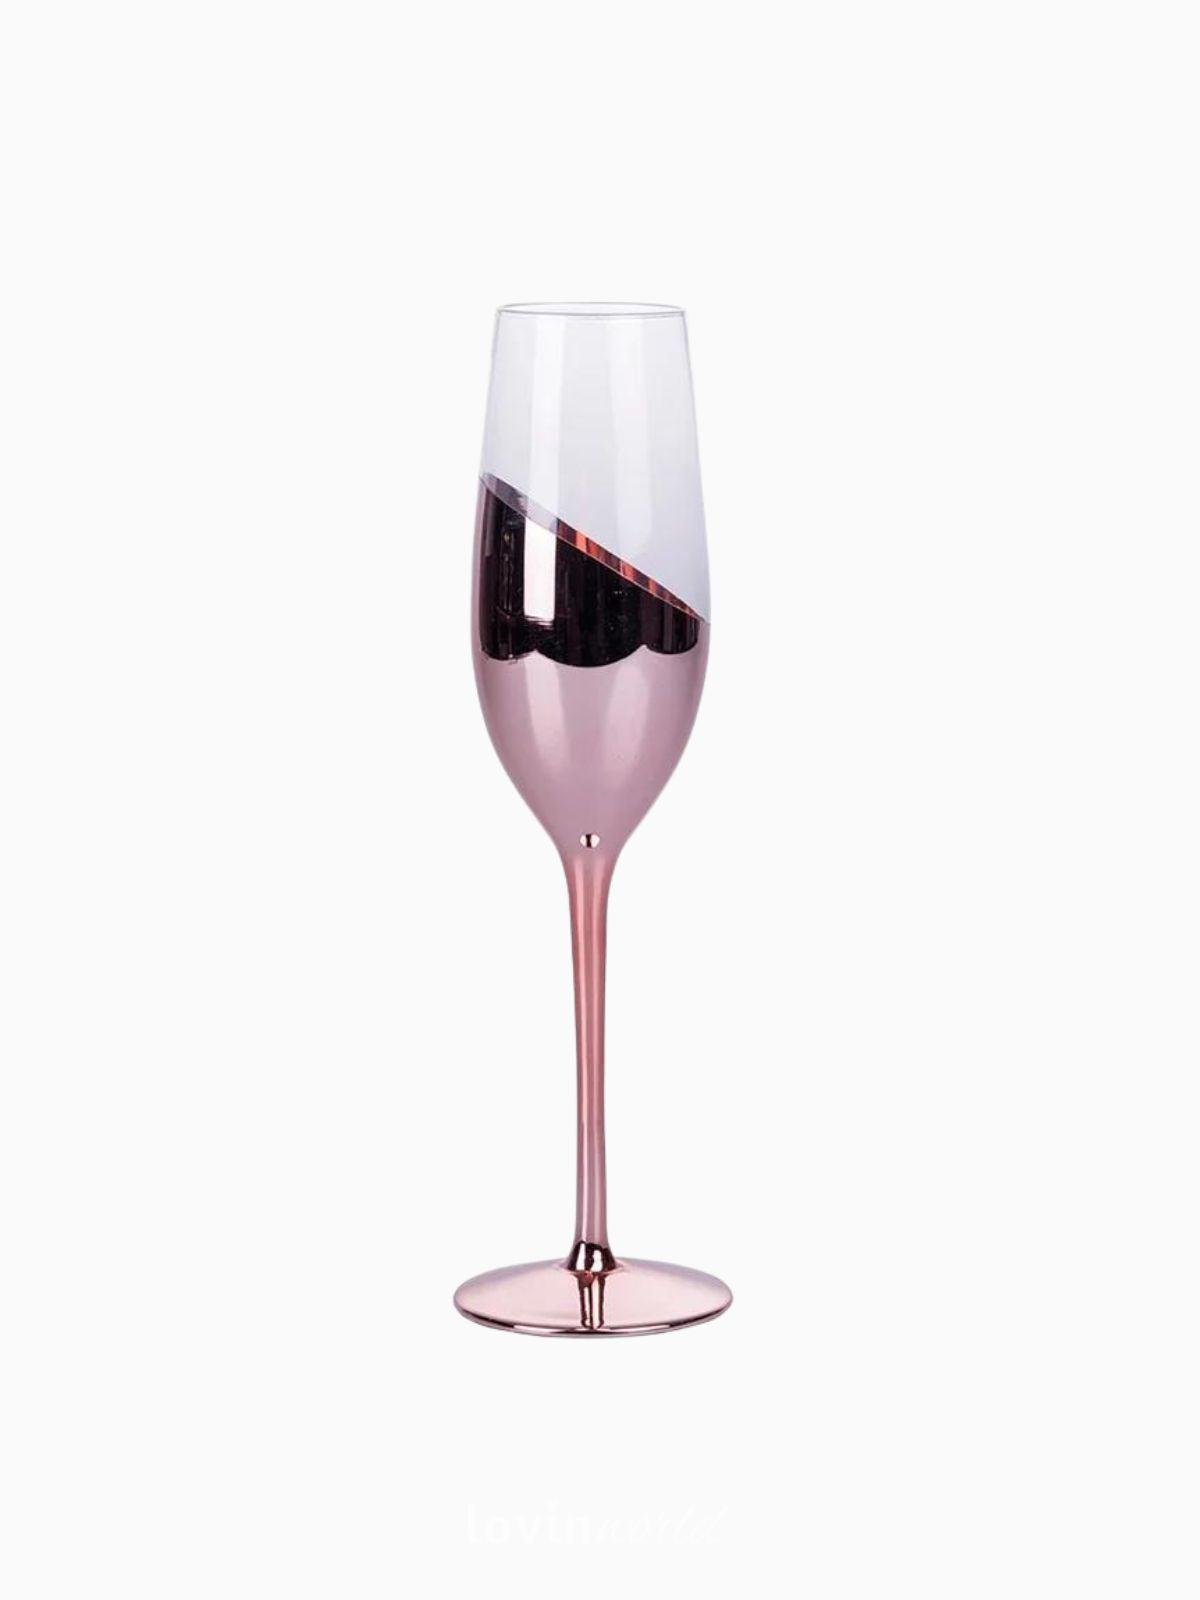 Set 6 Flûte champange Chic metallic finish, in colore rose gold 28 cl-1